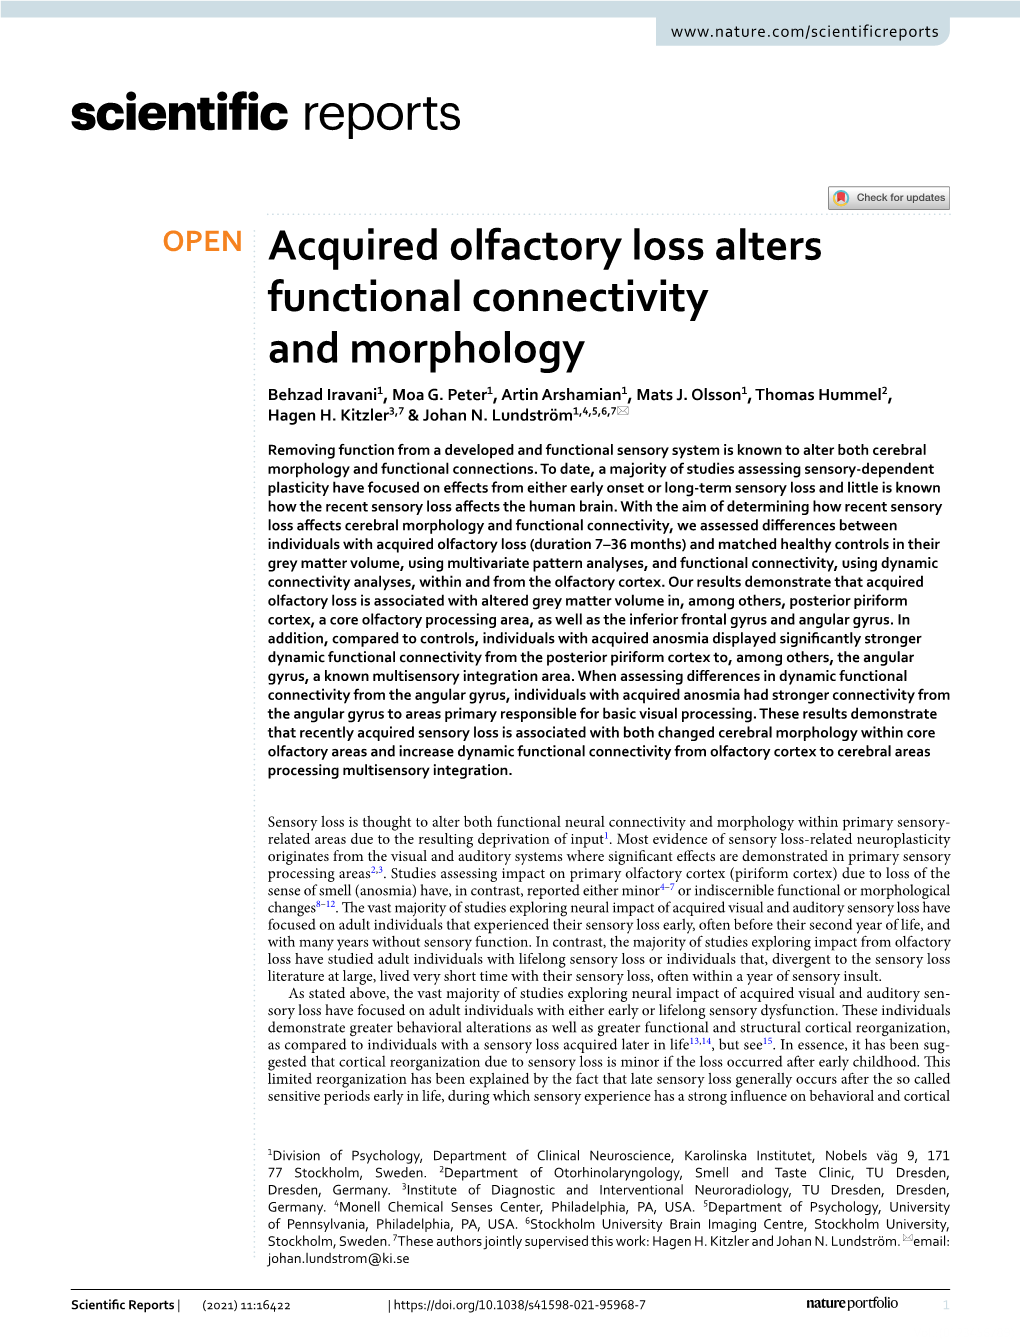 Acquired Olfactory Loss Alters Functional Connectivity and Morphology Behzad Iravani1, Moa G